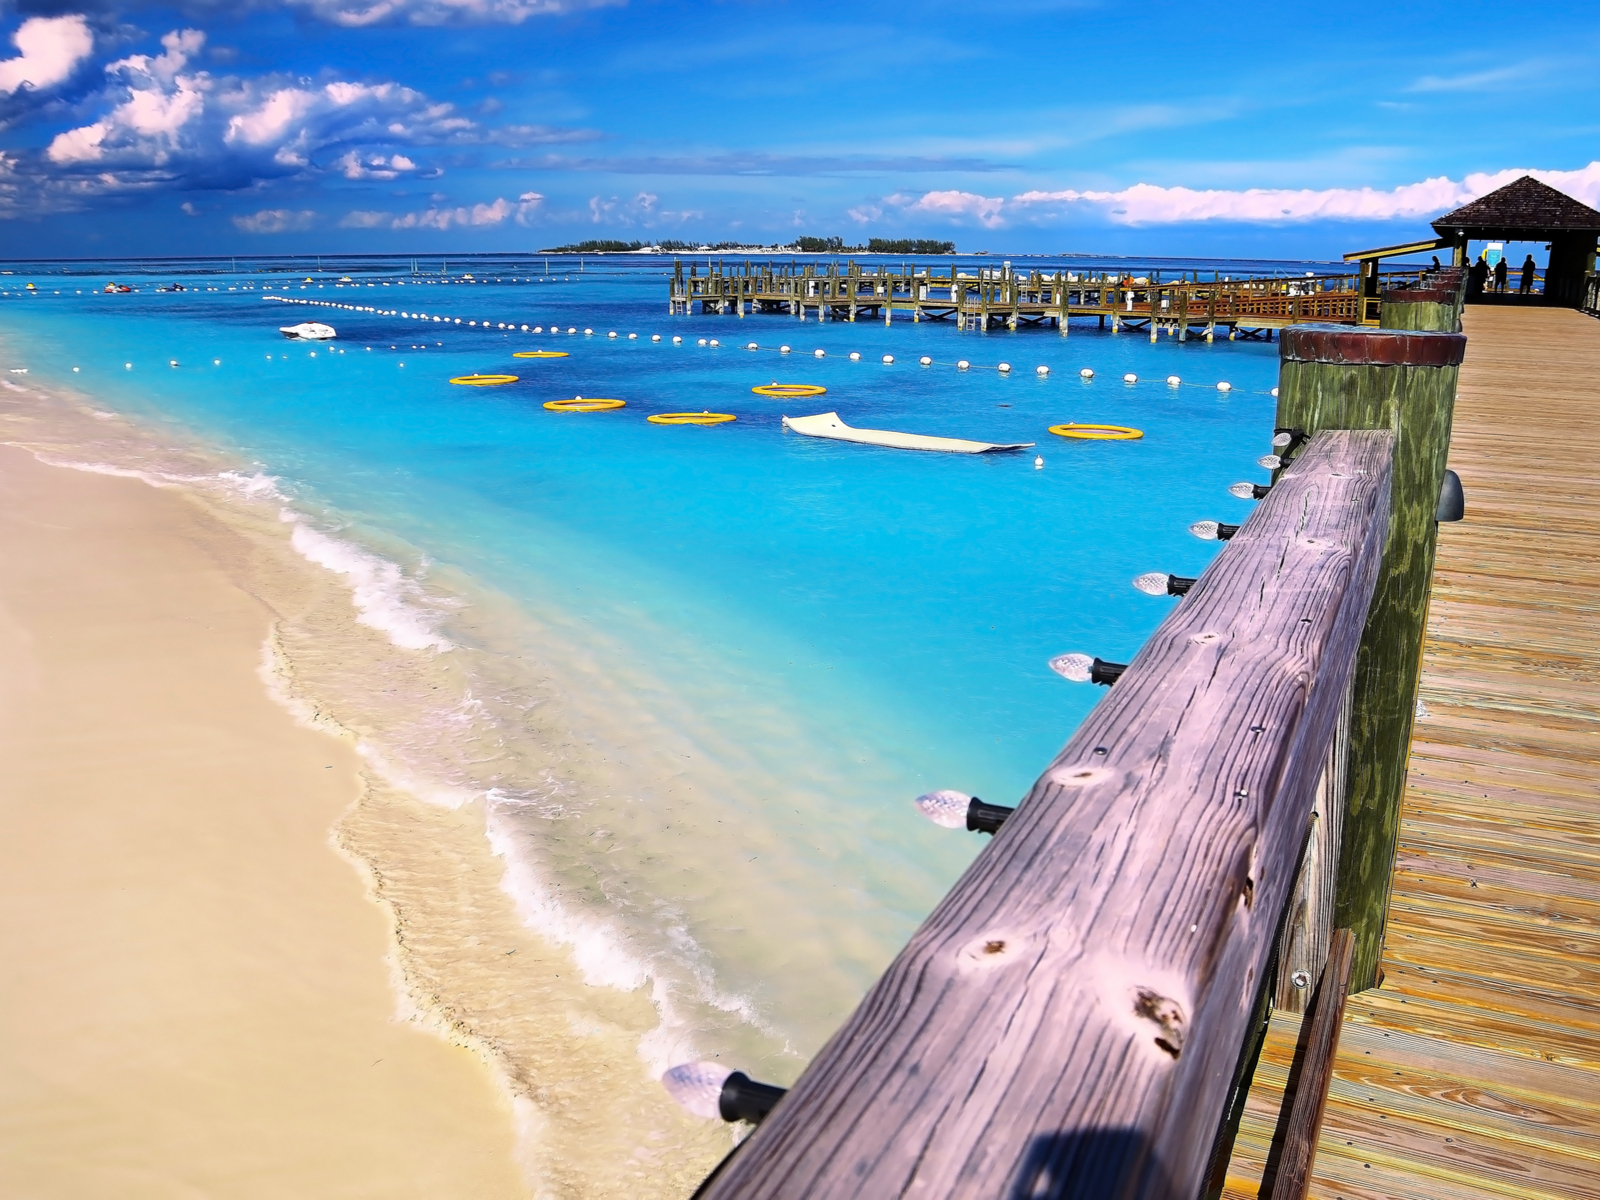 Gorgeous view of Paradise Cable Beach's pier for a piece on where to stay in the Bahamas